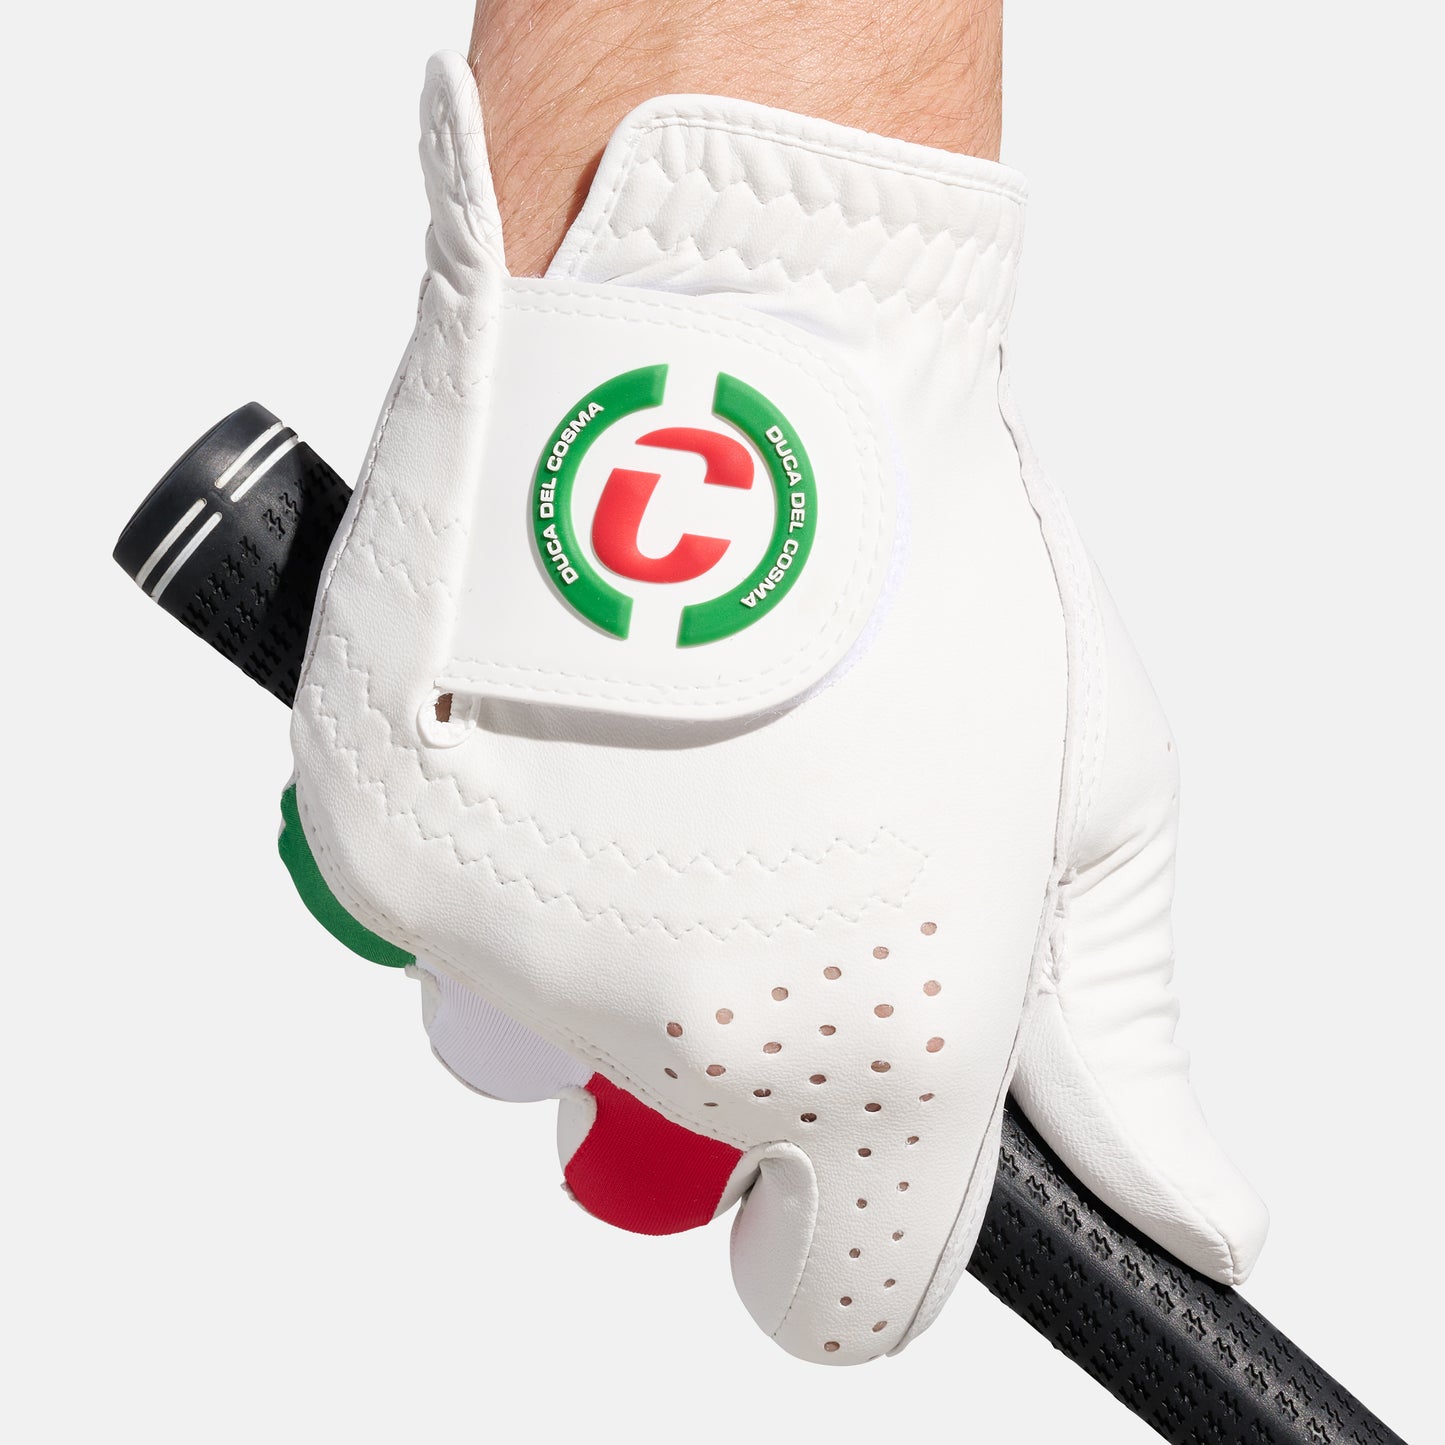 Hybrid Pro - Right - White/Green/Red